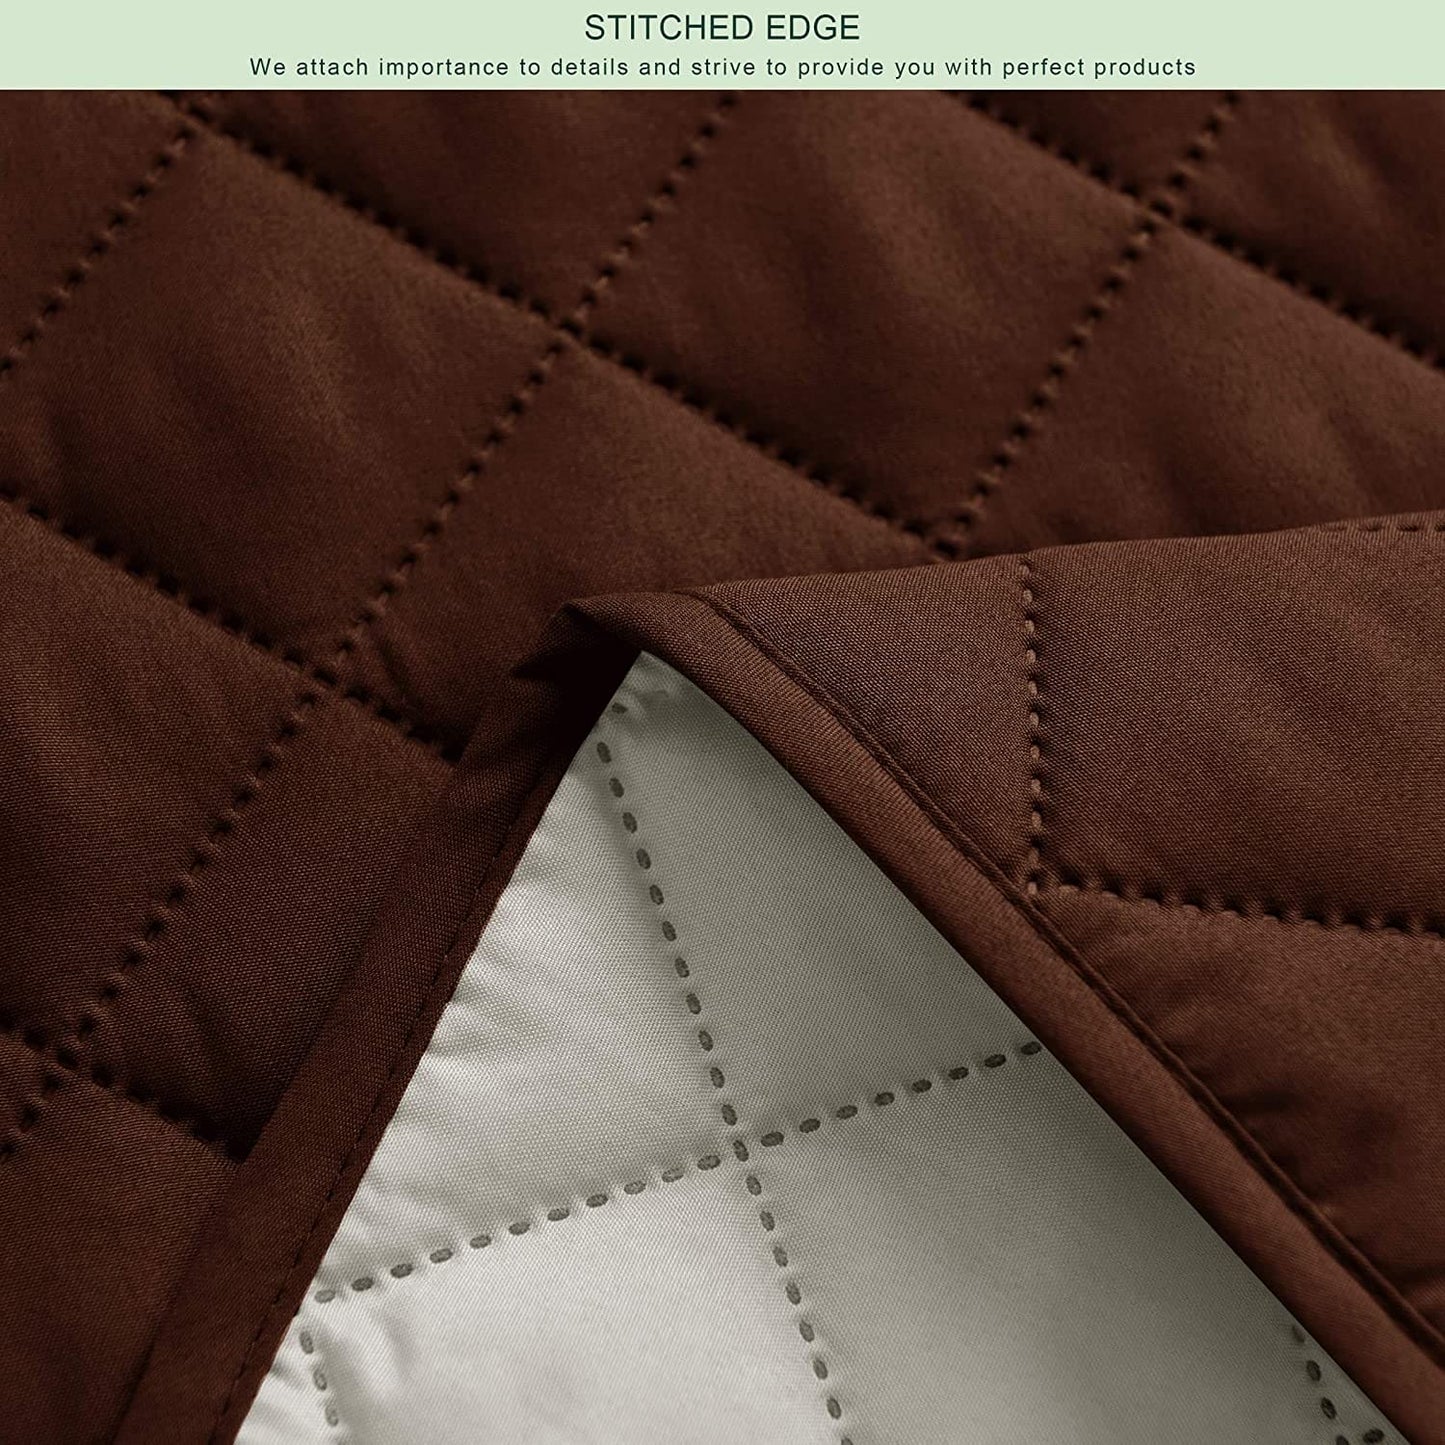 WATERPROOF COTTON QUILTED SOFA COVER - SOFA RUNNERS (CHOCOLATE BROWN)